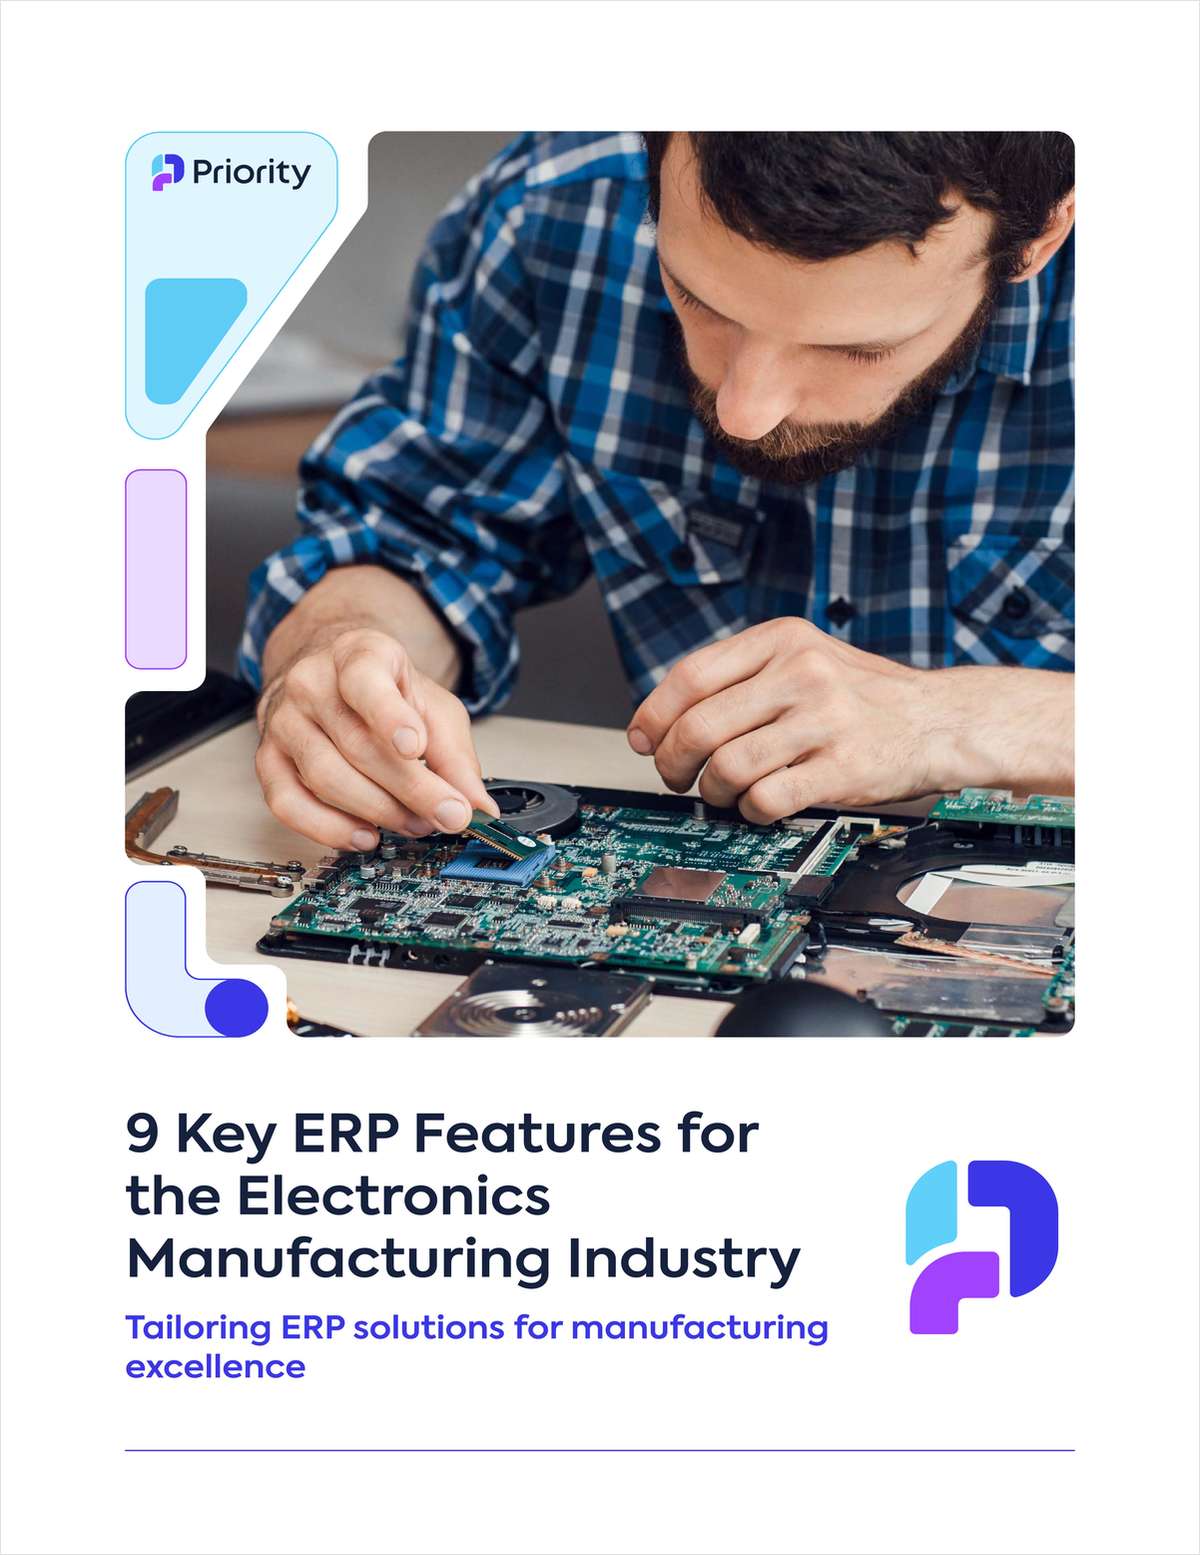 9 Key ERP Features for the Electronics Manufacturing Industry